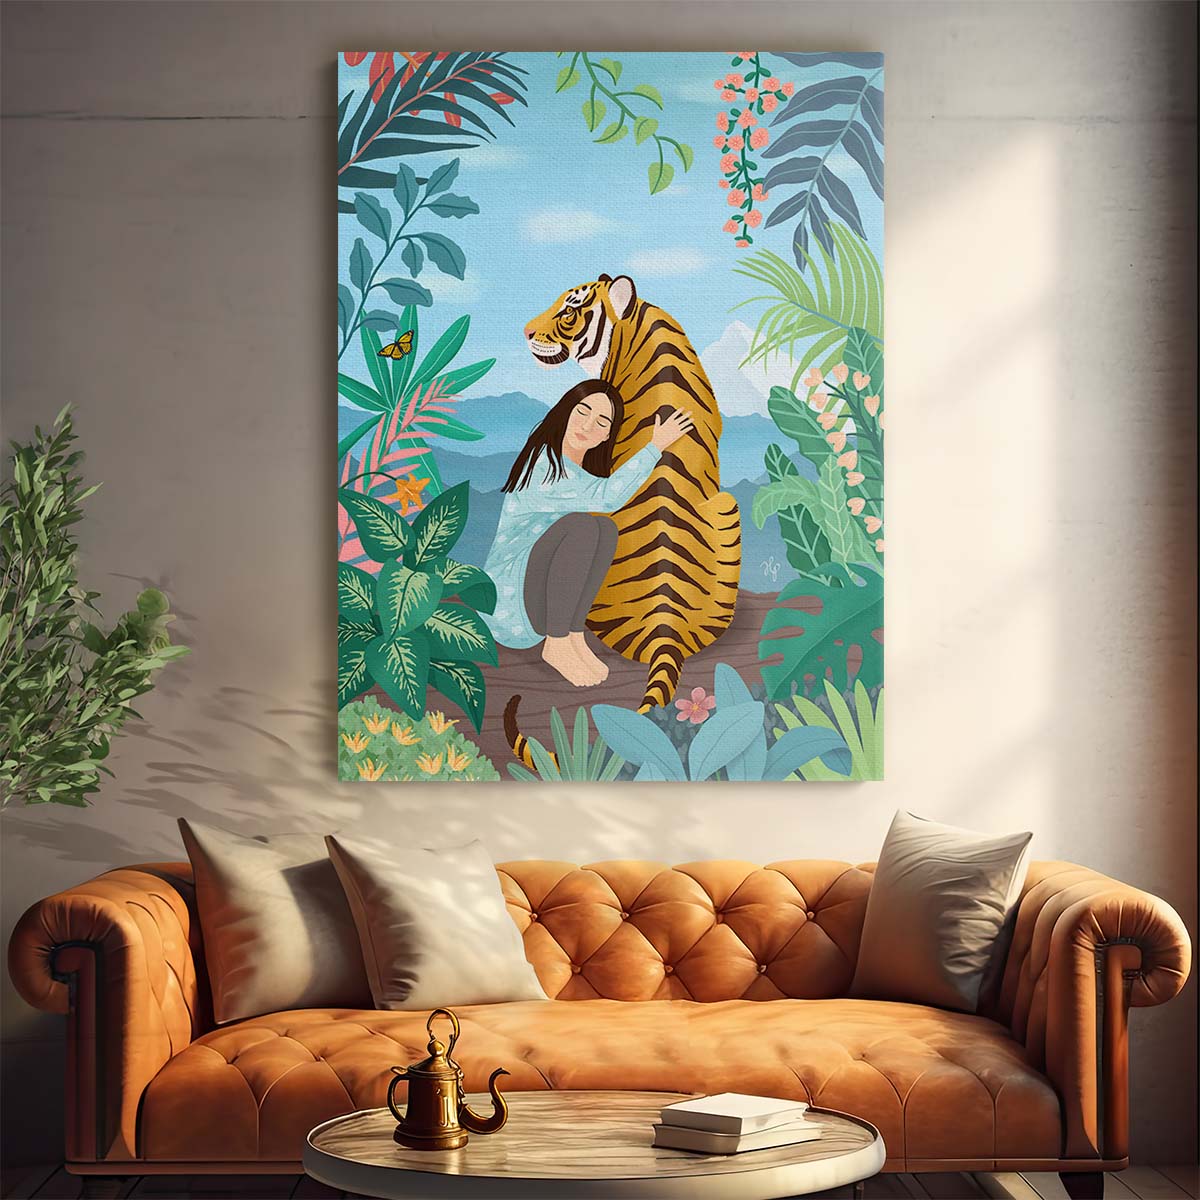 Tranquil Illustration of Woman Embracing Tiger in Tropical Paradise by Luxuriance Designs, made in USA